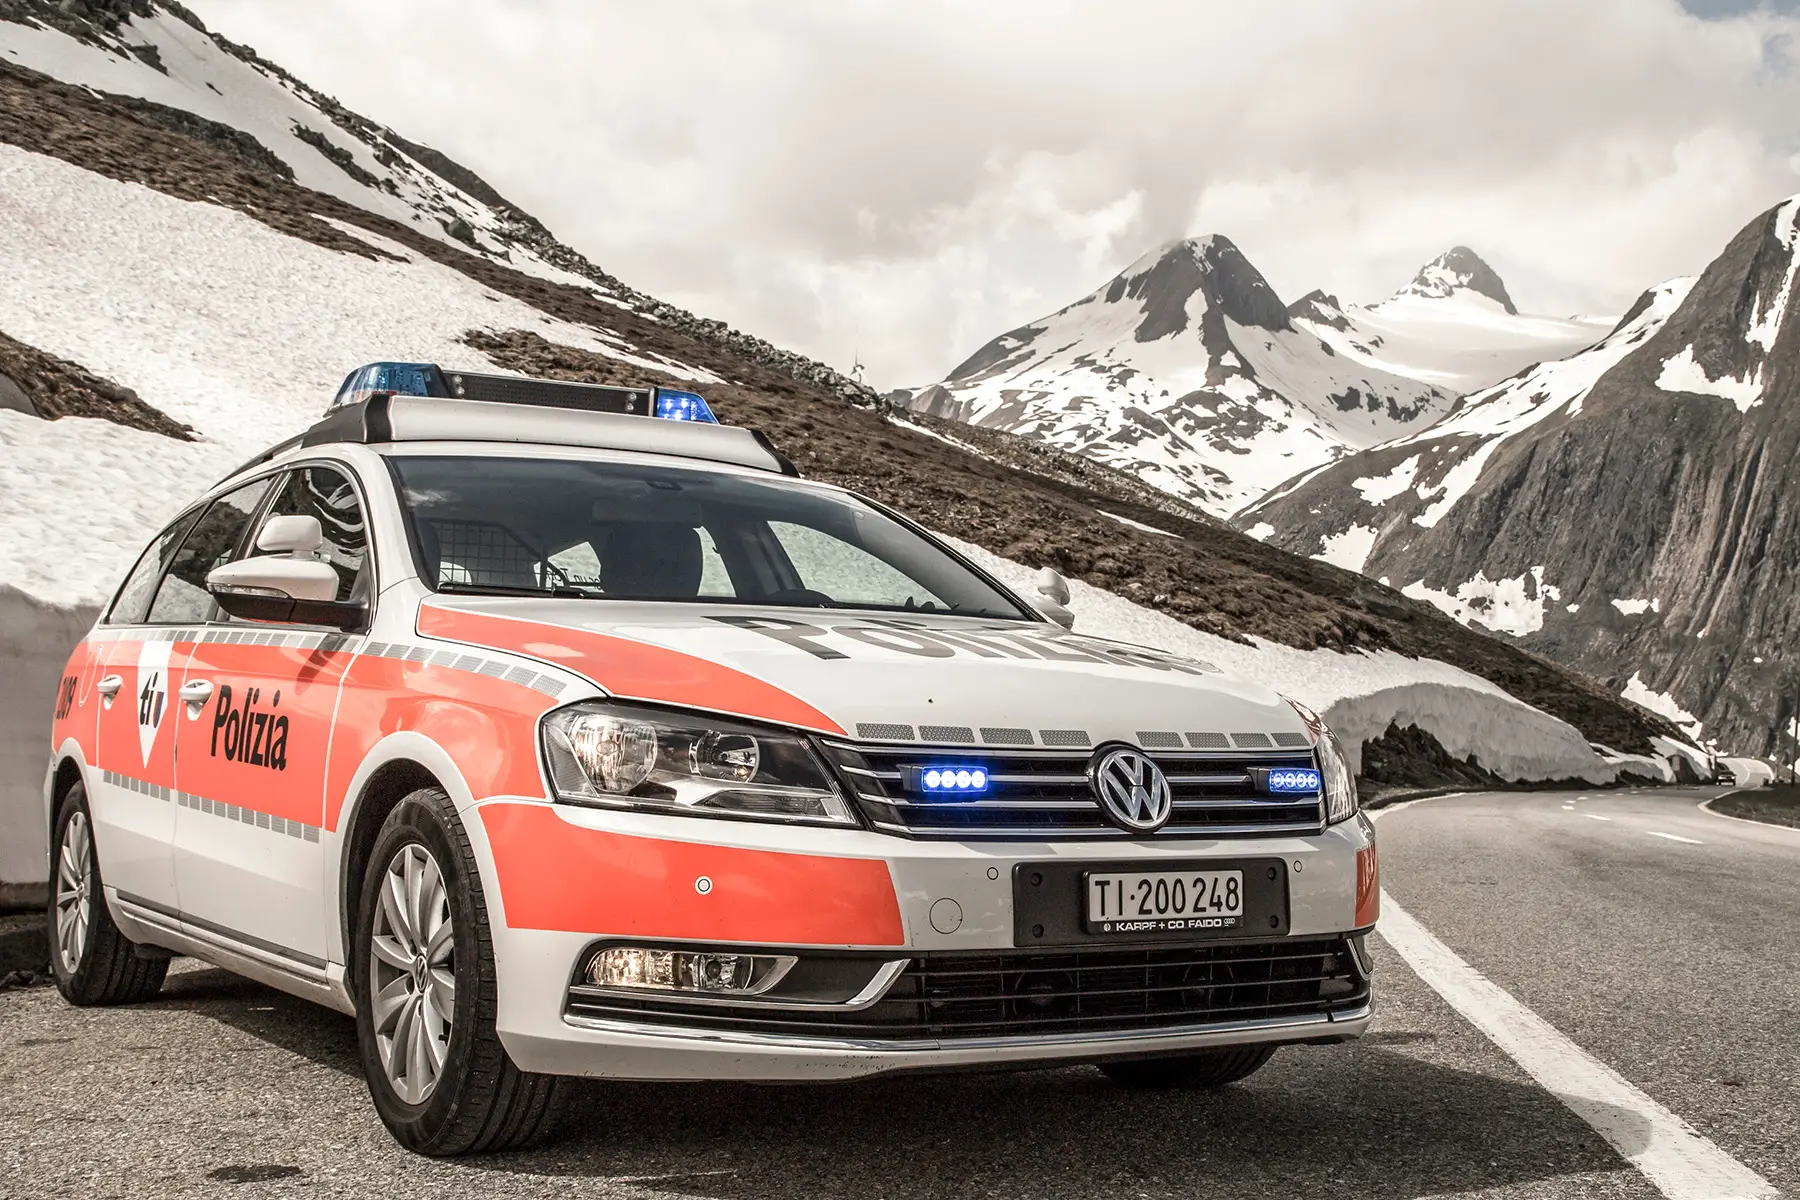 Police car in the mountains of Ticino